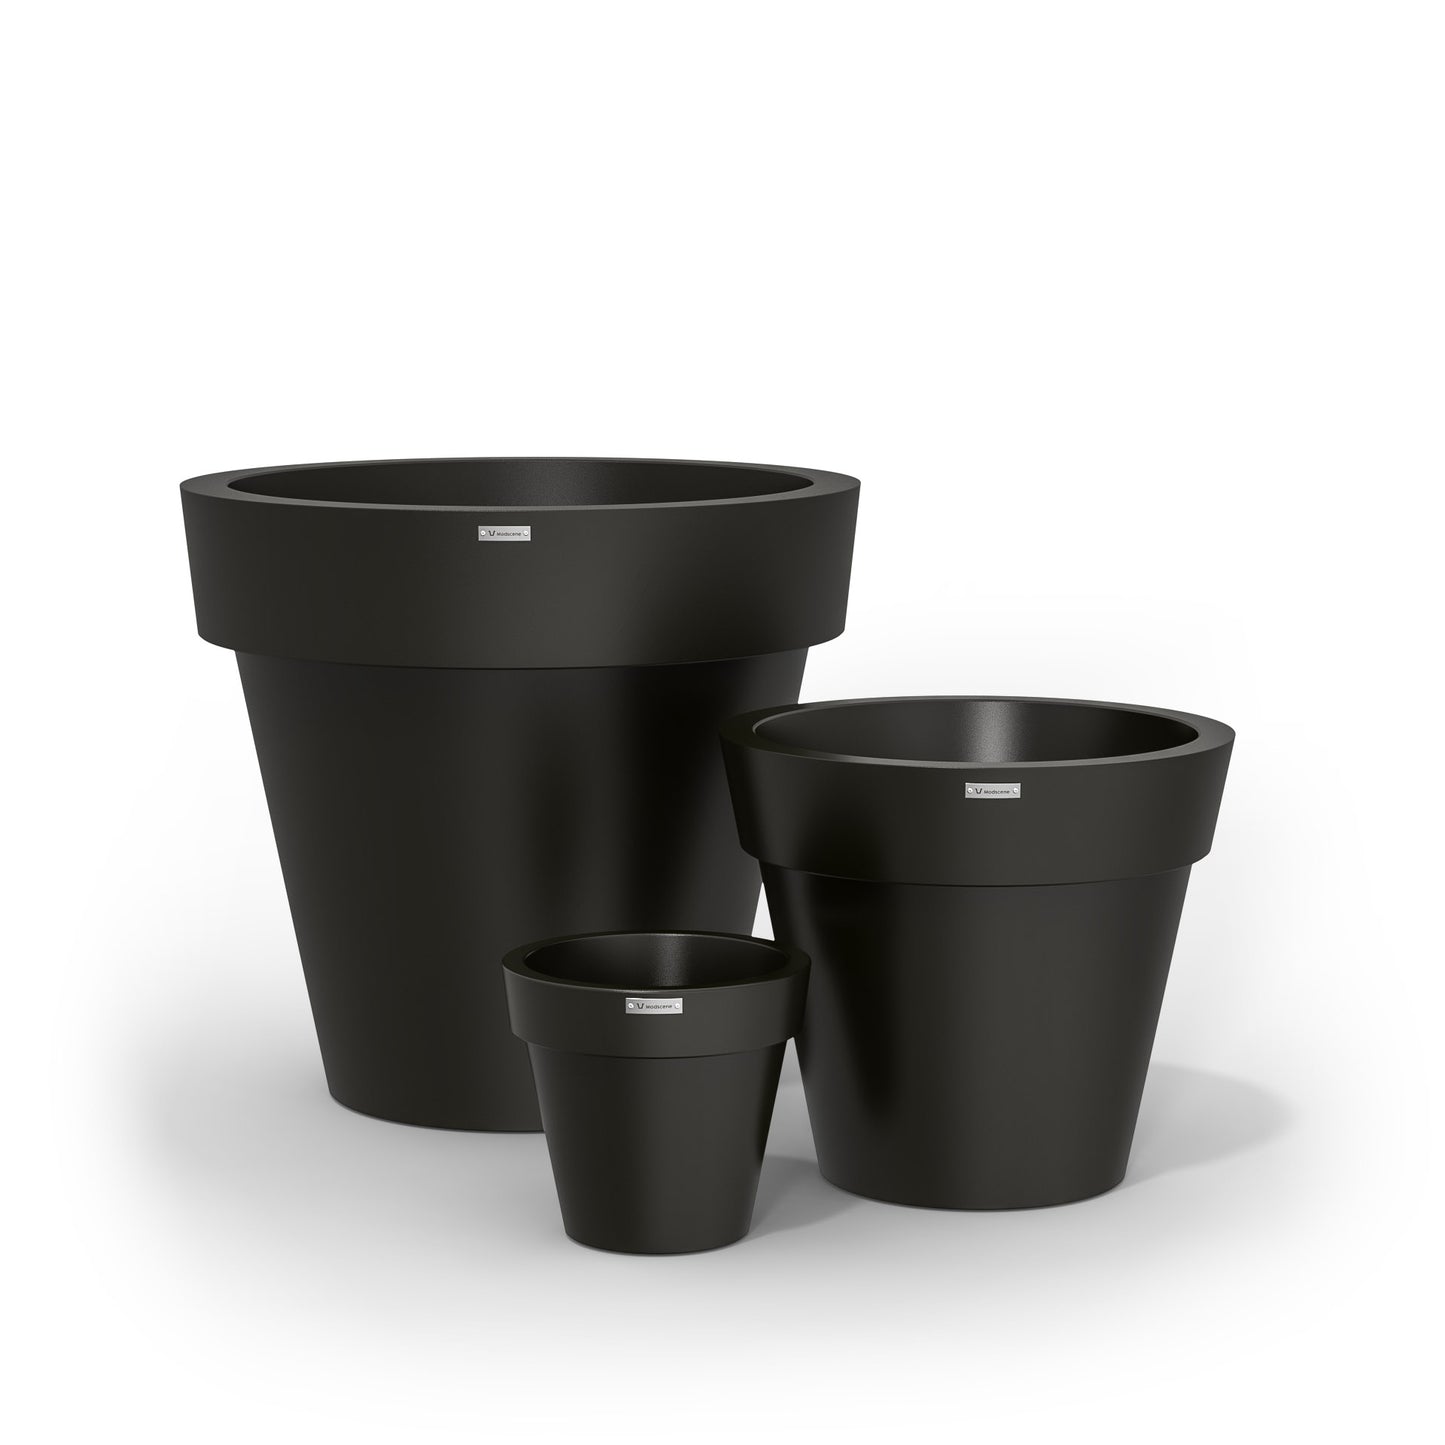 A black cluster of three Modscene planters pots. Made in NZ